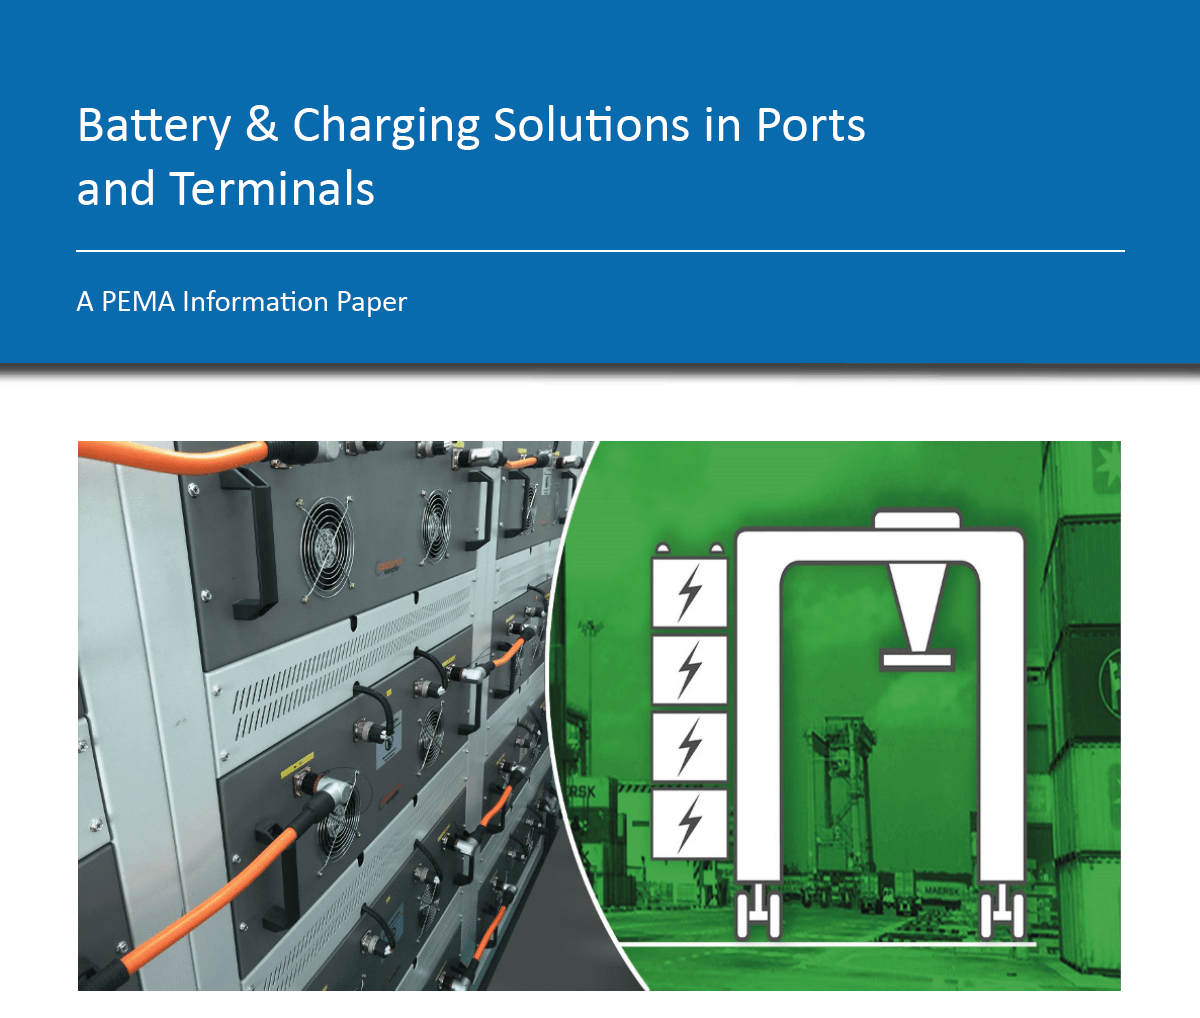 PEMA Publishes Battery & Charging Solutions in Ports and Terminals Information Paper